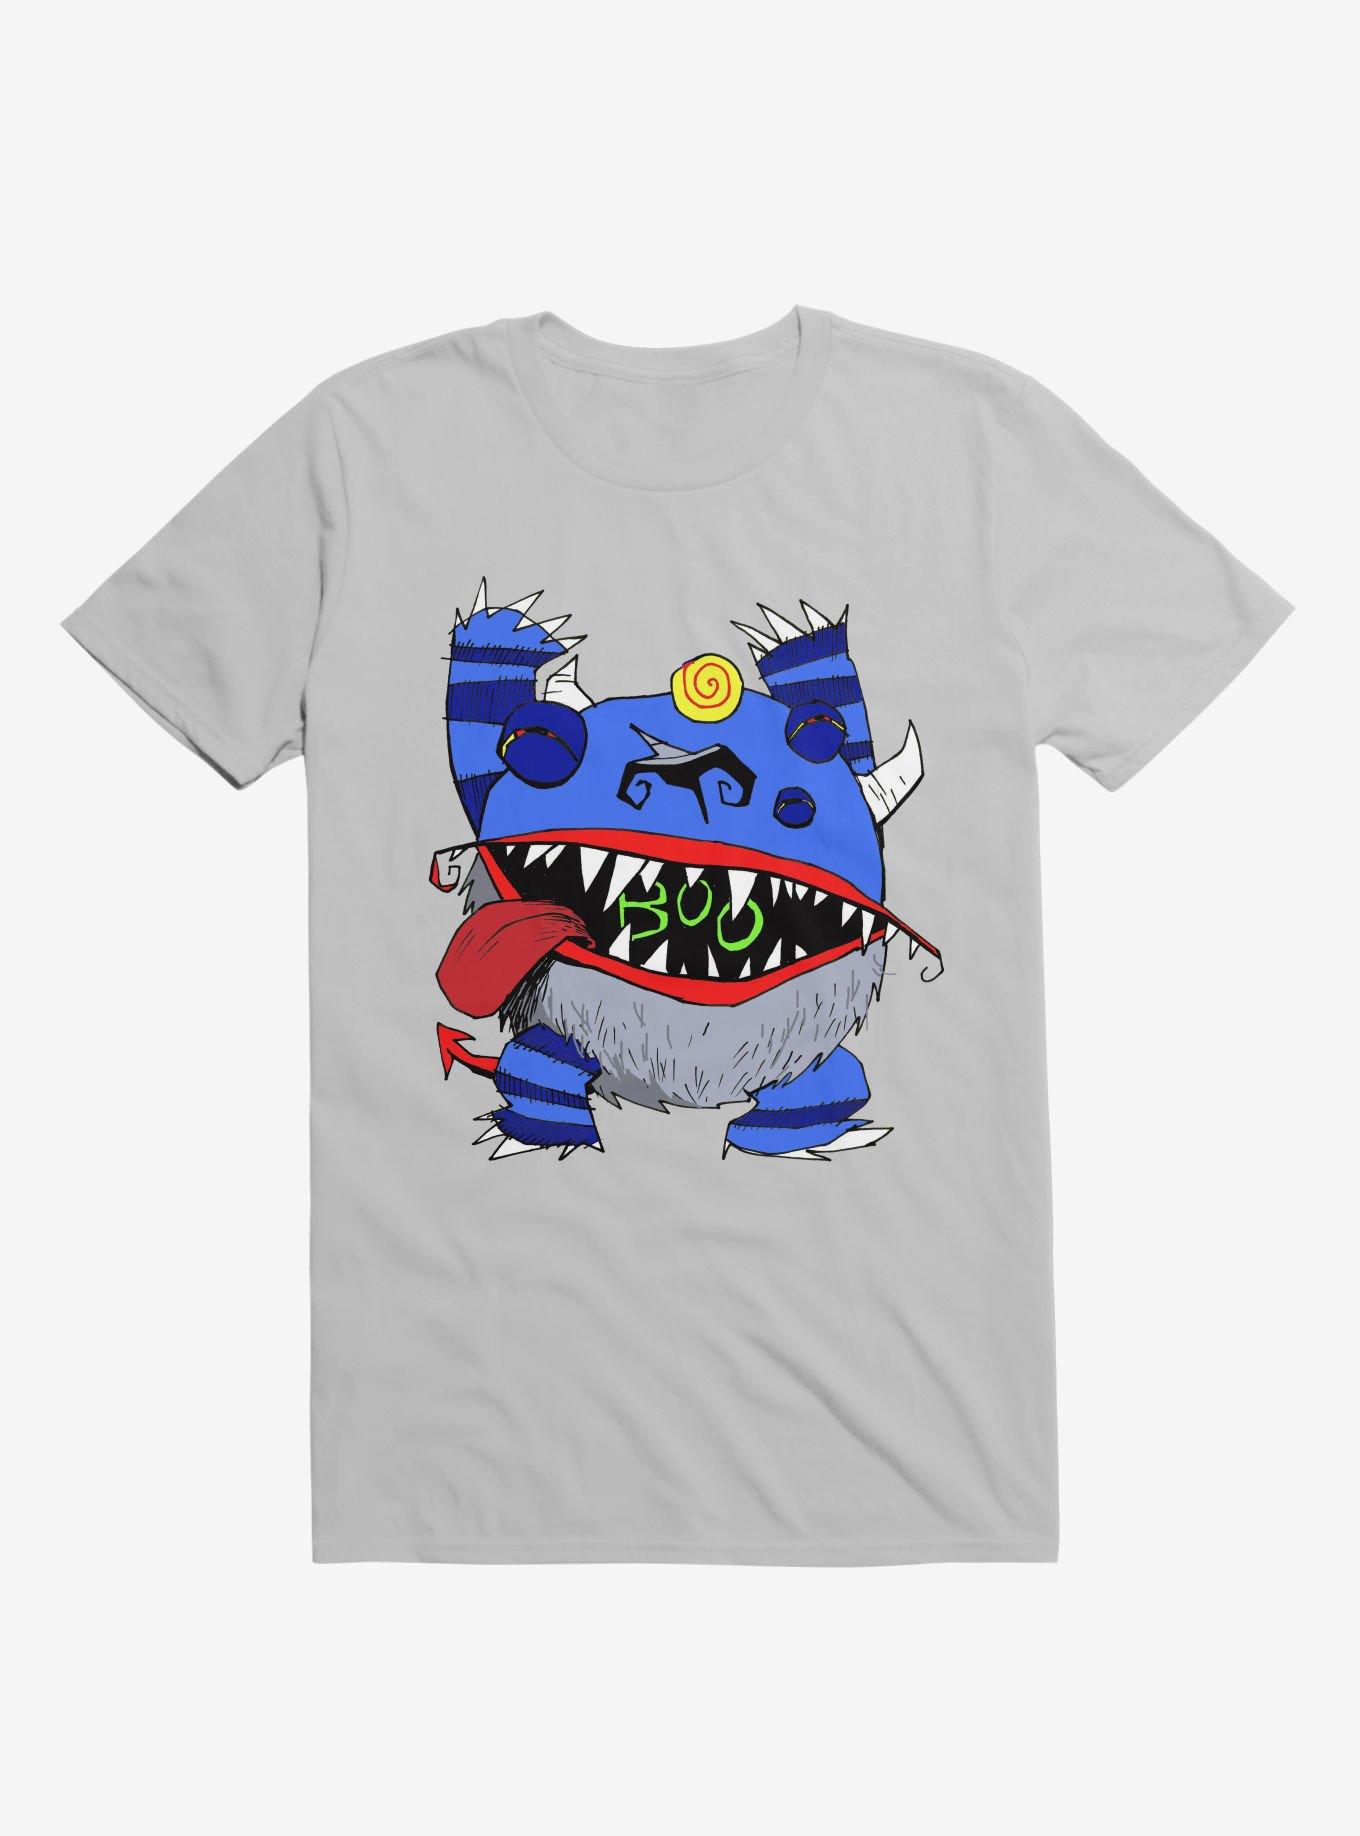 Boo Monster Bug-A-Boo Monster Ice Grey T-Shirt, , hi-res